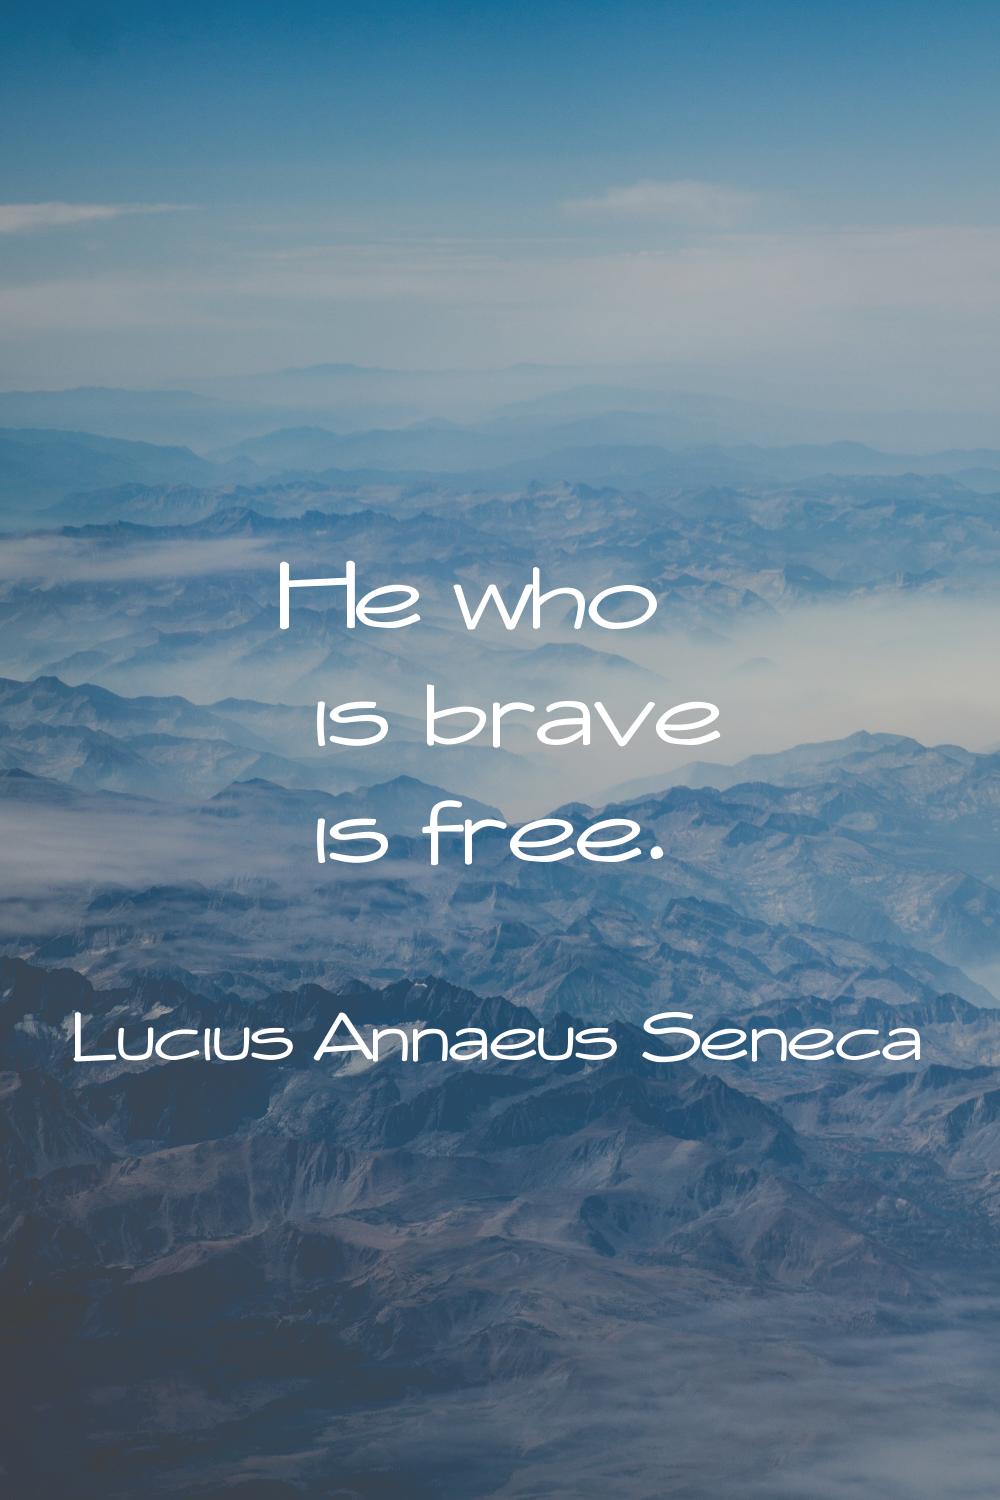 He who is brave is free.